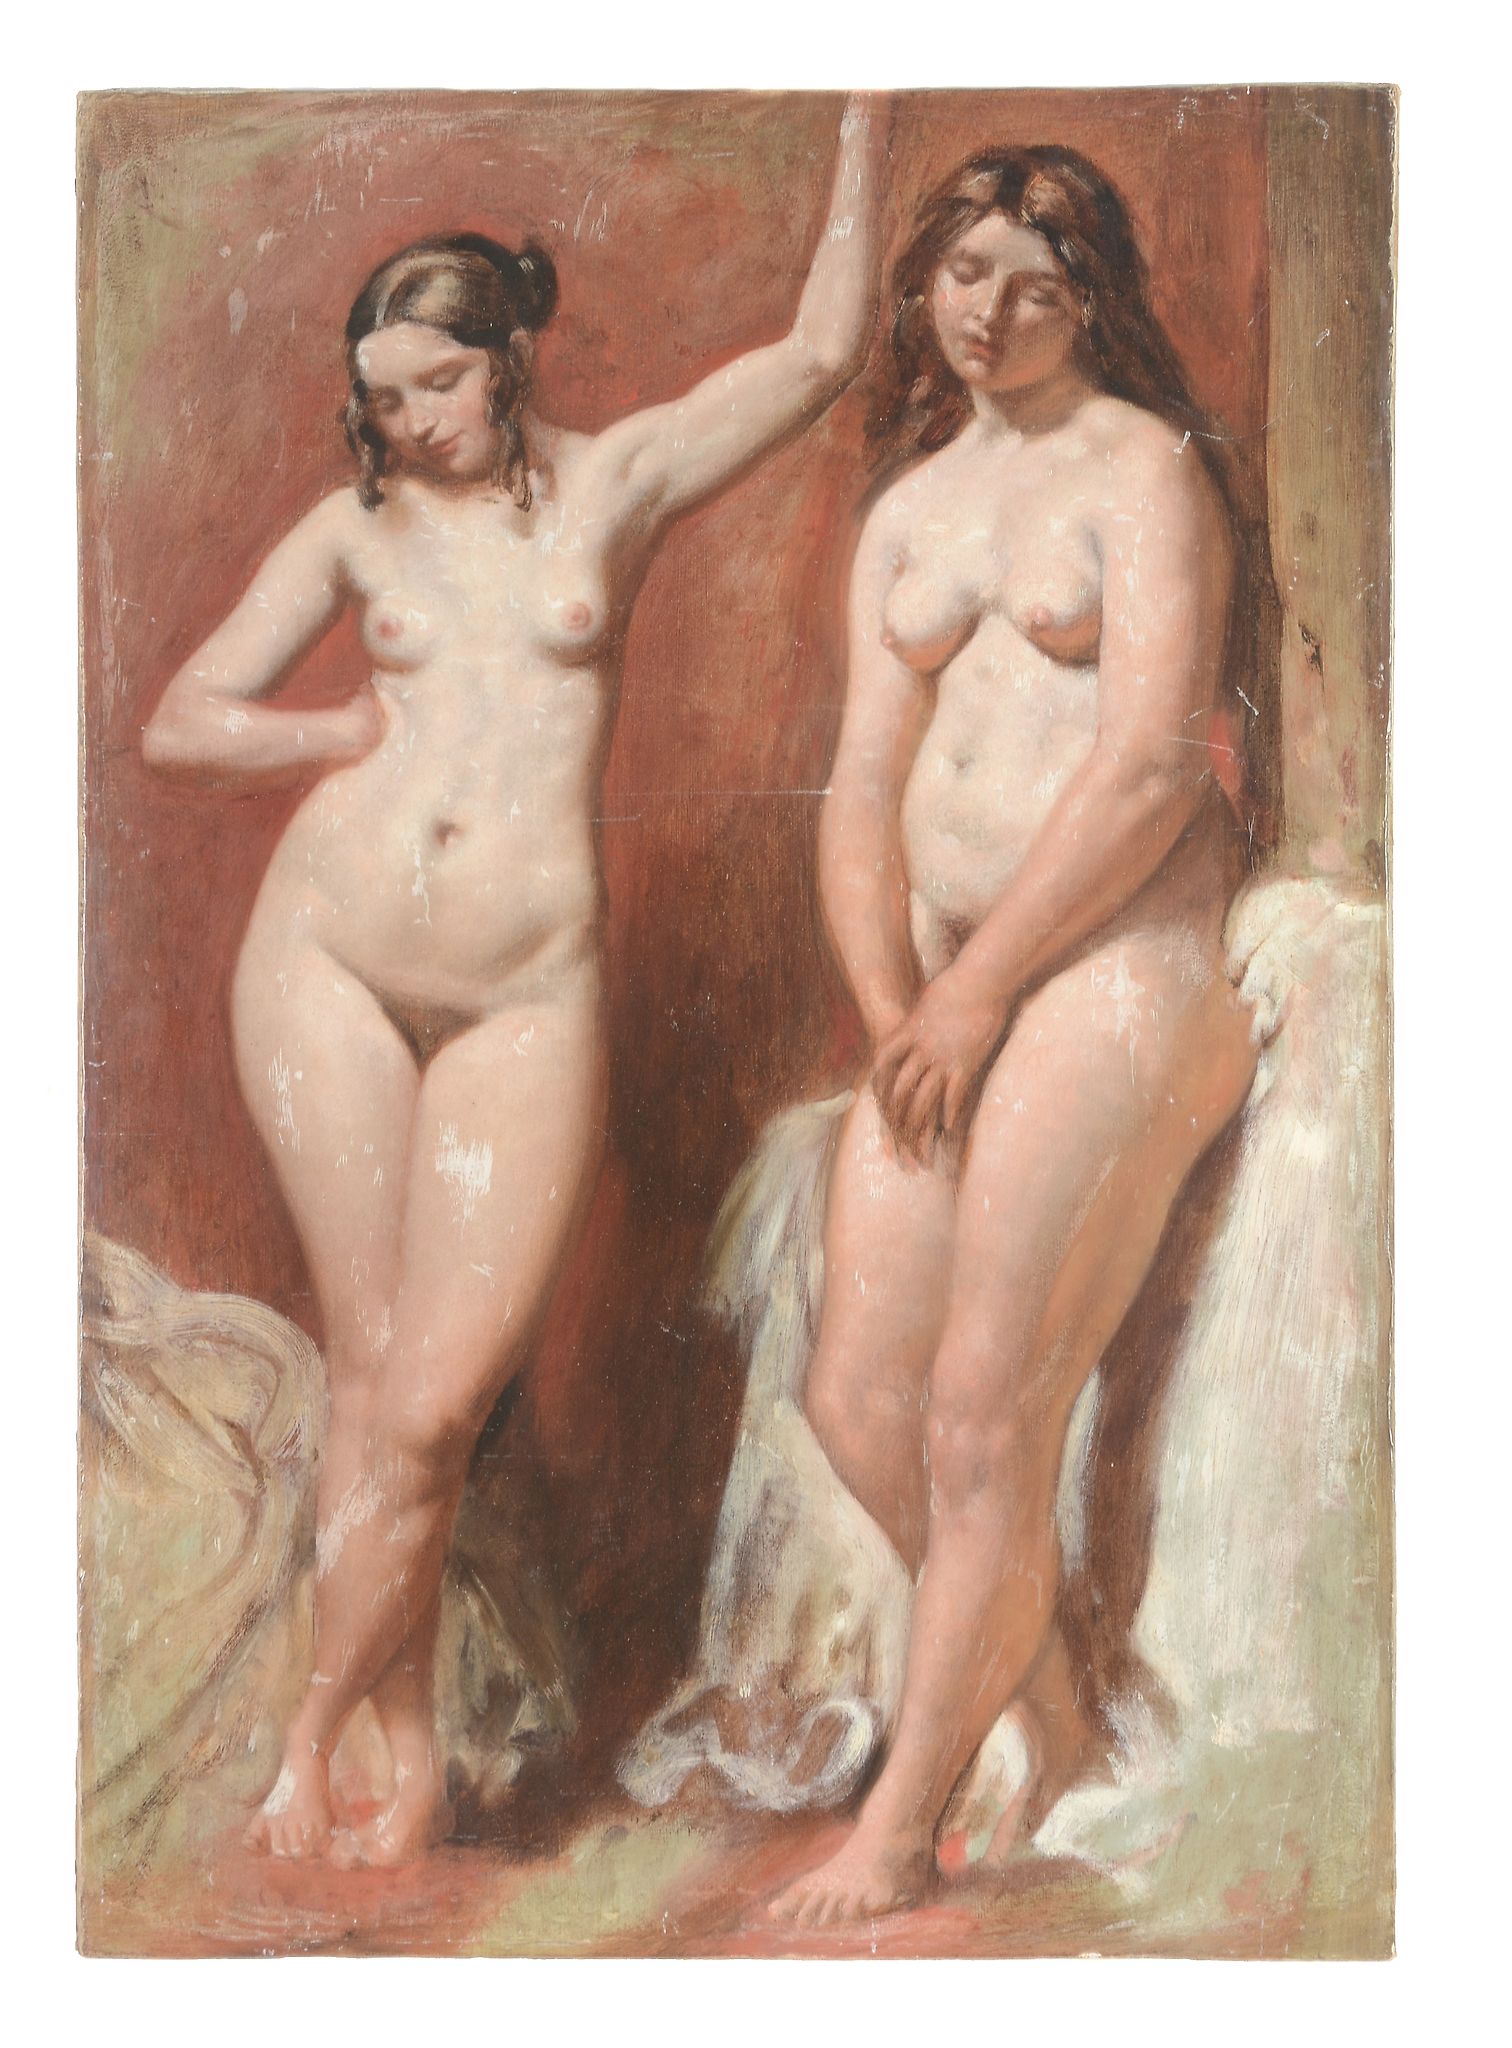 Manner of William Etty Two nude models in a studio Oil on board Manner of William Etty (1787-1849) - Image 2 of 3